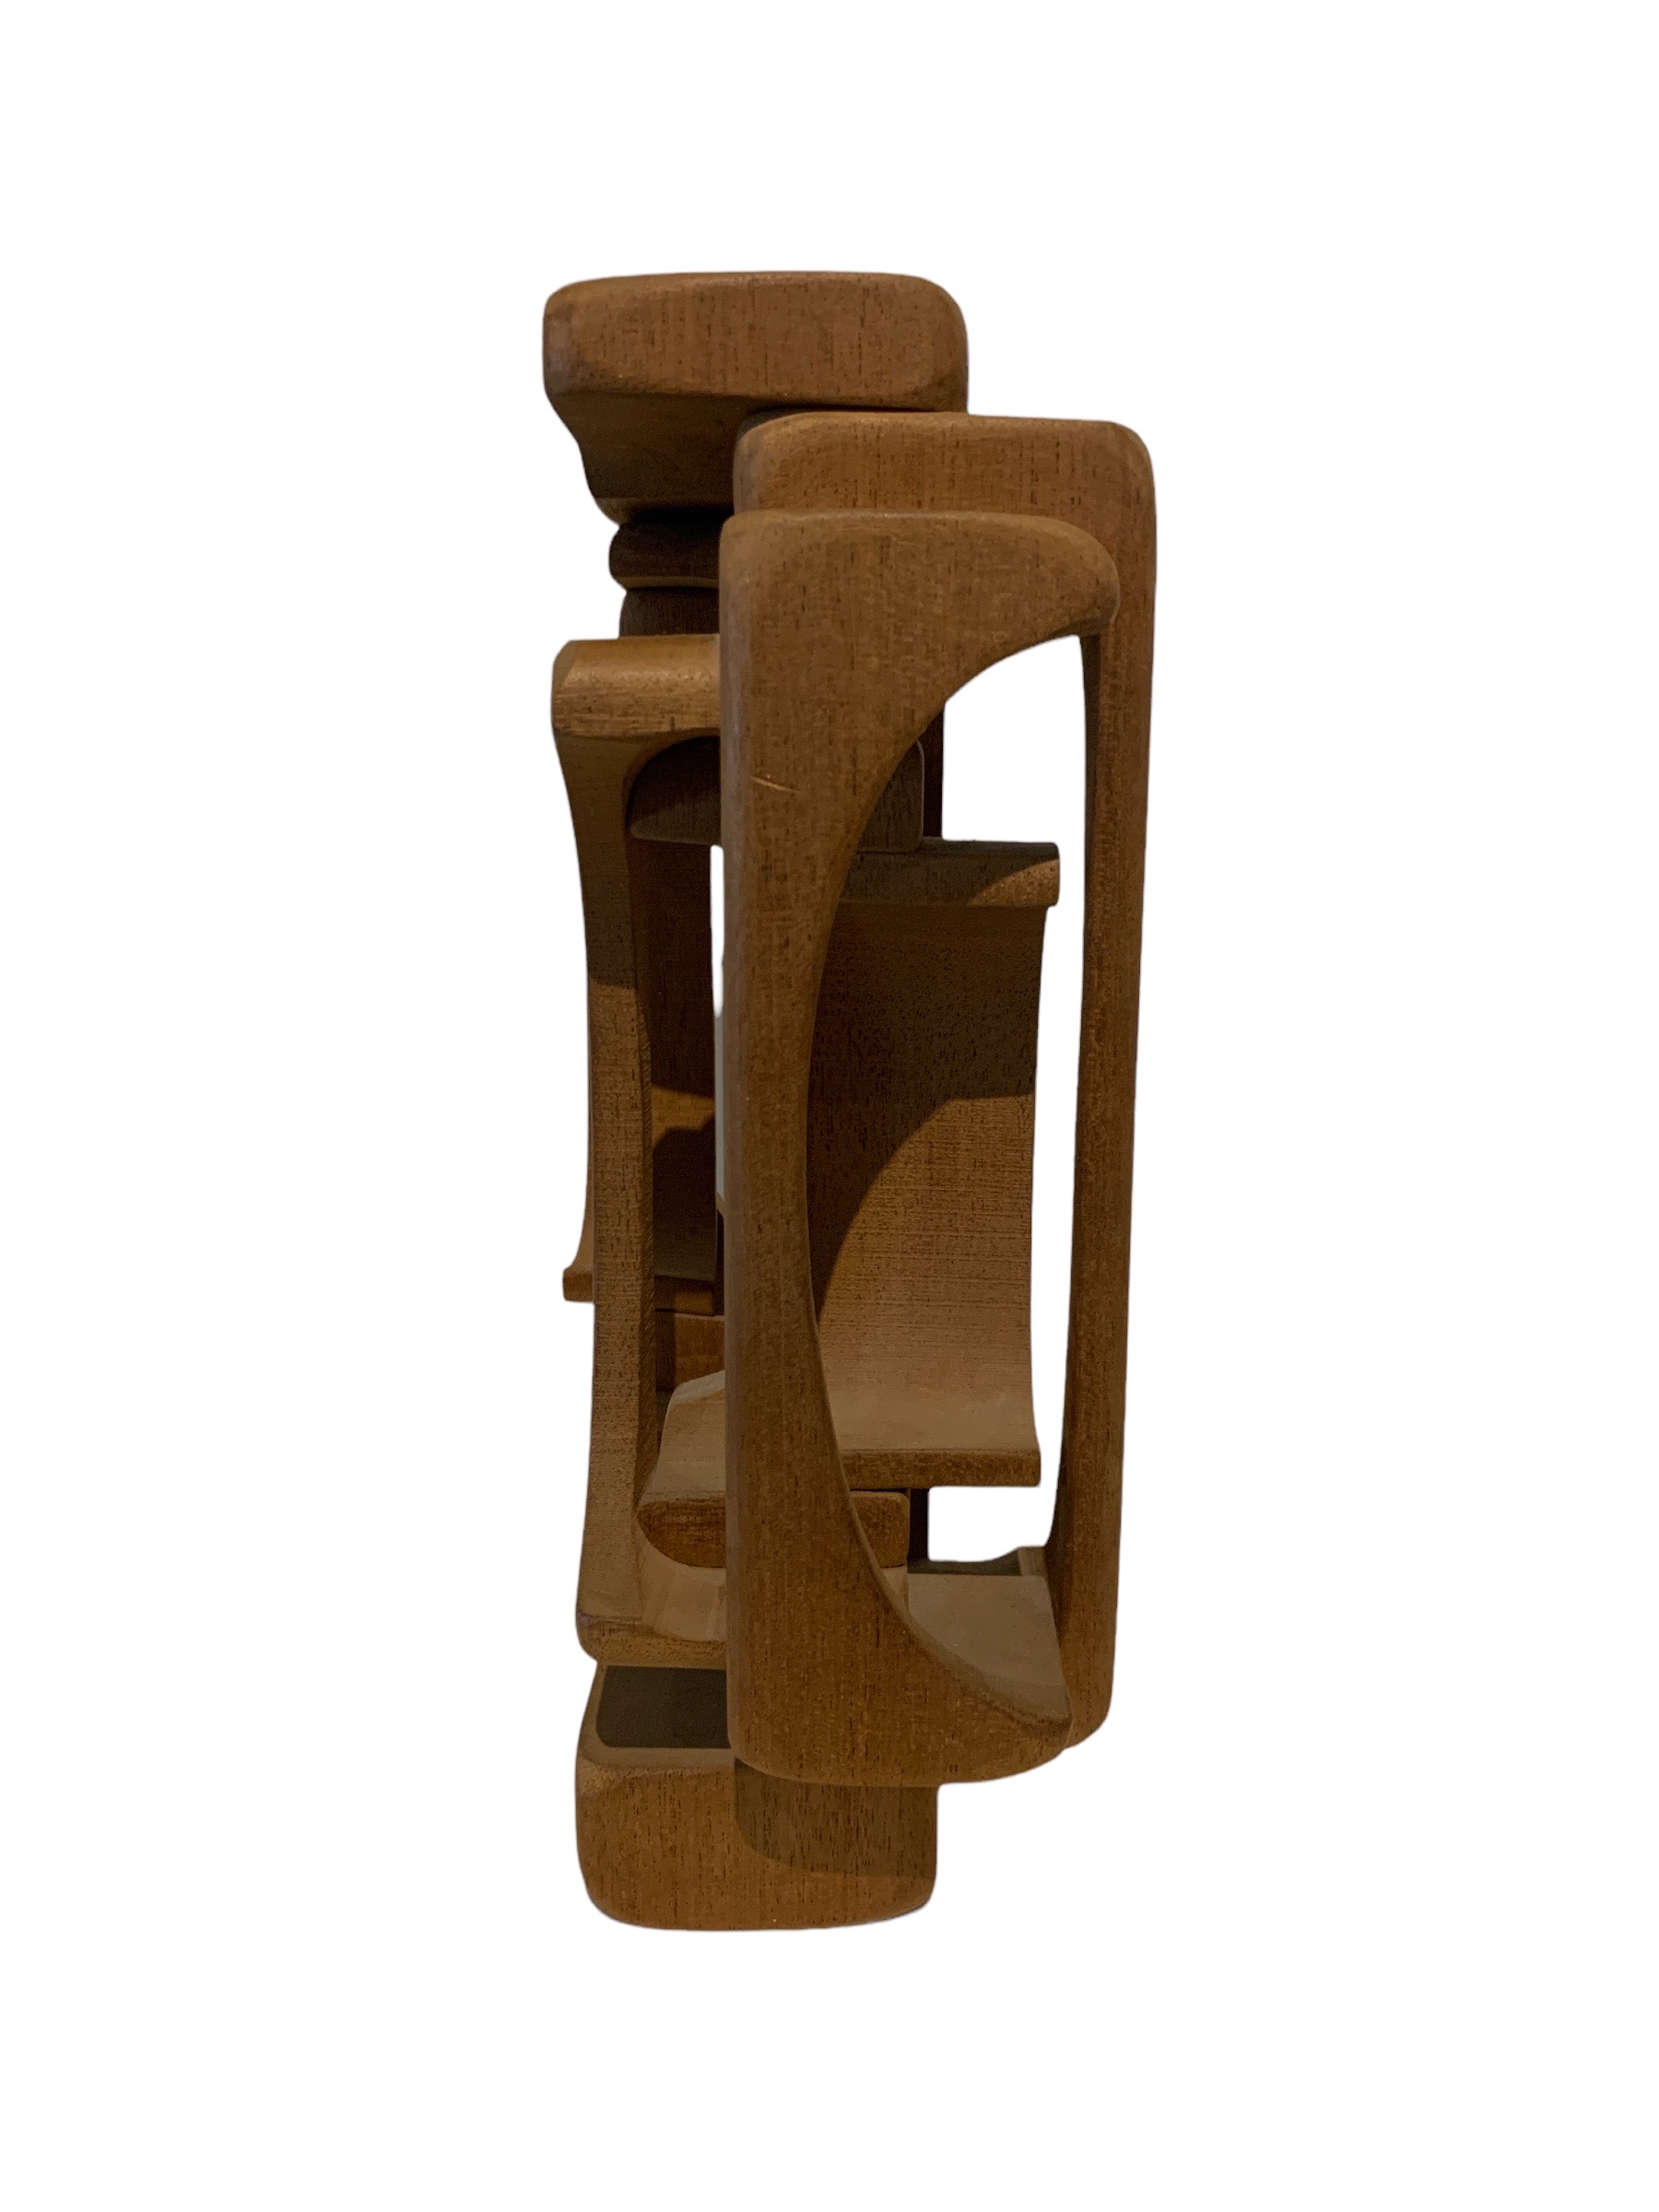 BRIAN WILLSHER, BRITISH, 1930 - 2010, A 20TH CENTURY CARVED WOOD ABSTRACT SCULPTURE Articulated - Image 2 of 5